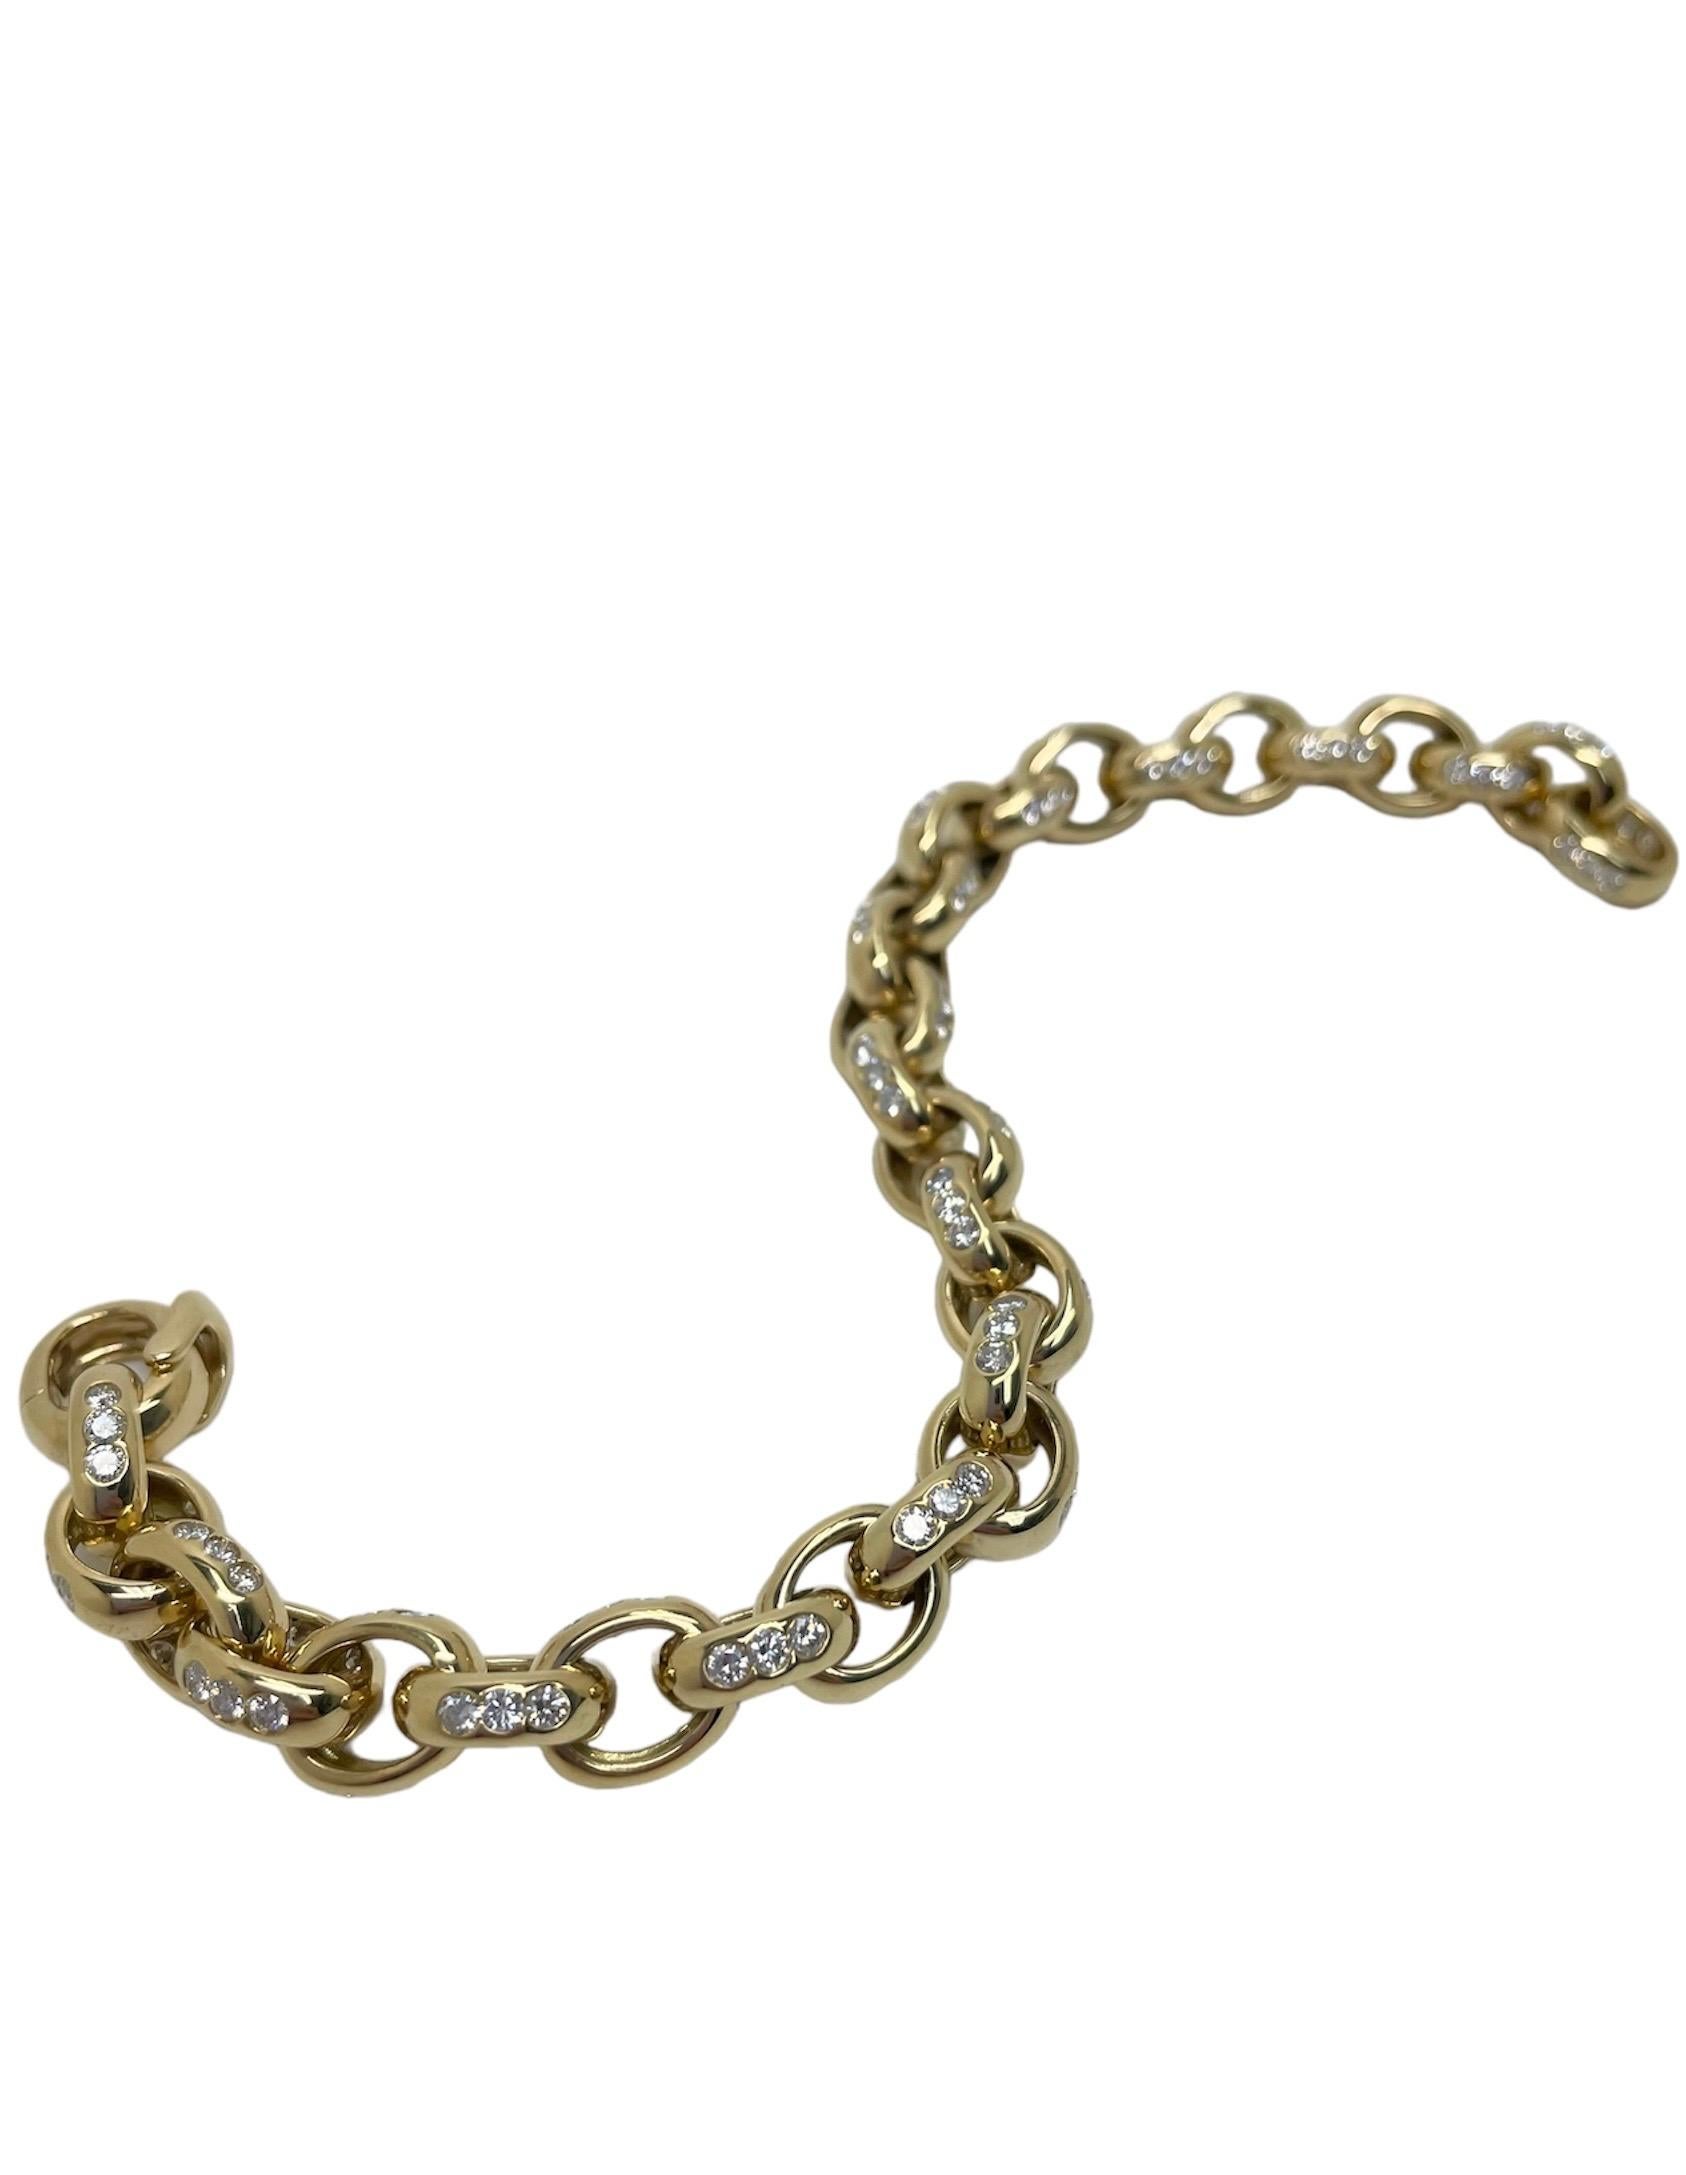 Contemporary Tiffany & Co., 18K Yellow Gold and Diamond Bracelet For Sale